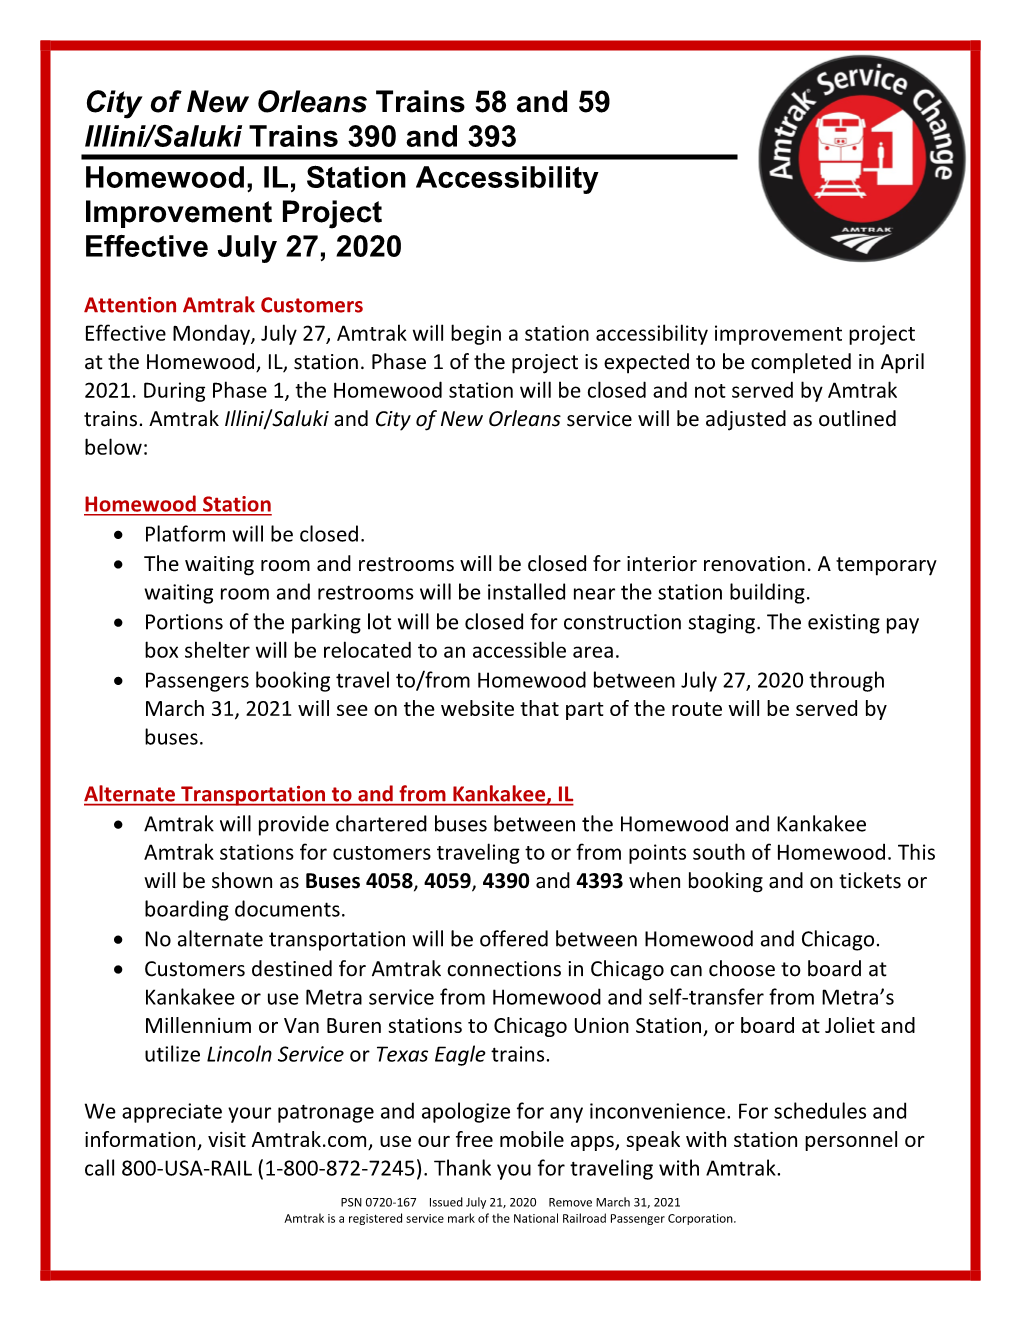 Homewood, IL, Station Accessibility Improvement Project Effective July 27, 2020